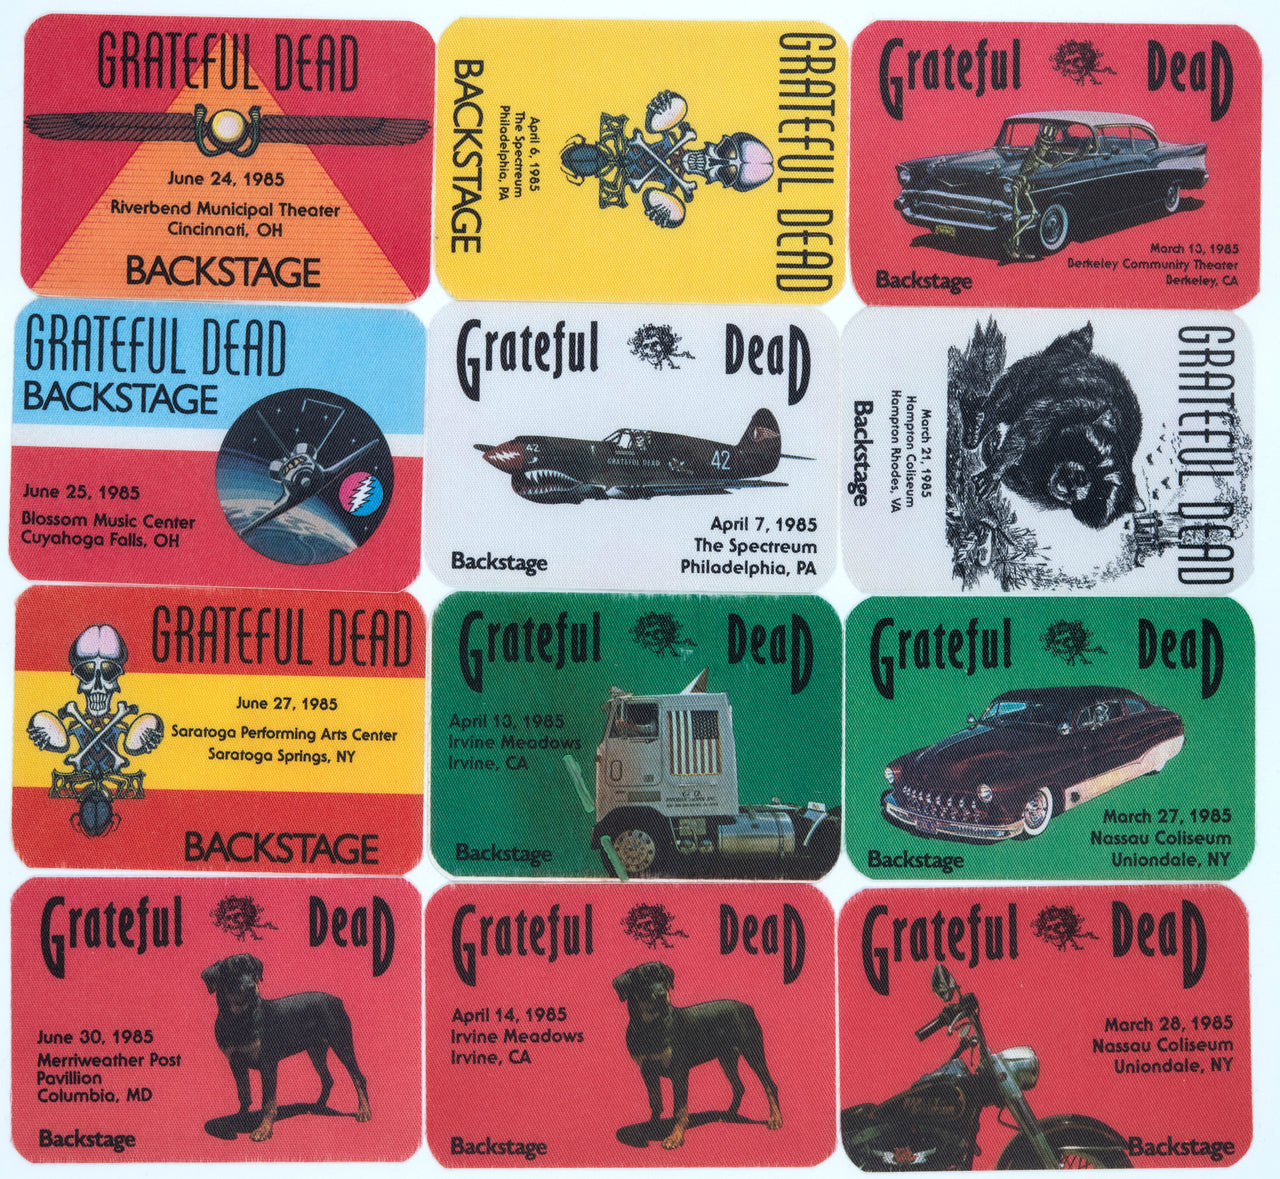 Grateful Dead Backstage Passes (3/13/1985 - 6/30/1985) from Dan Healy